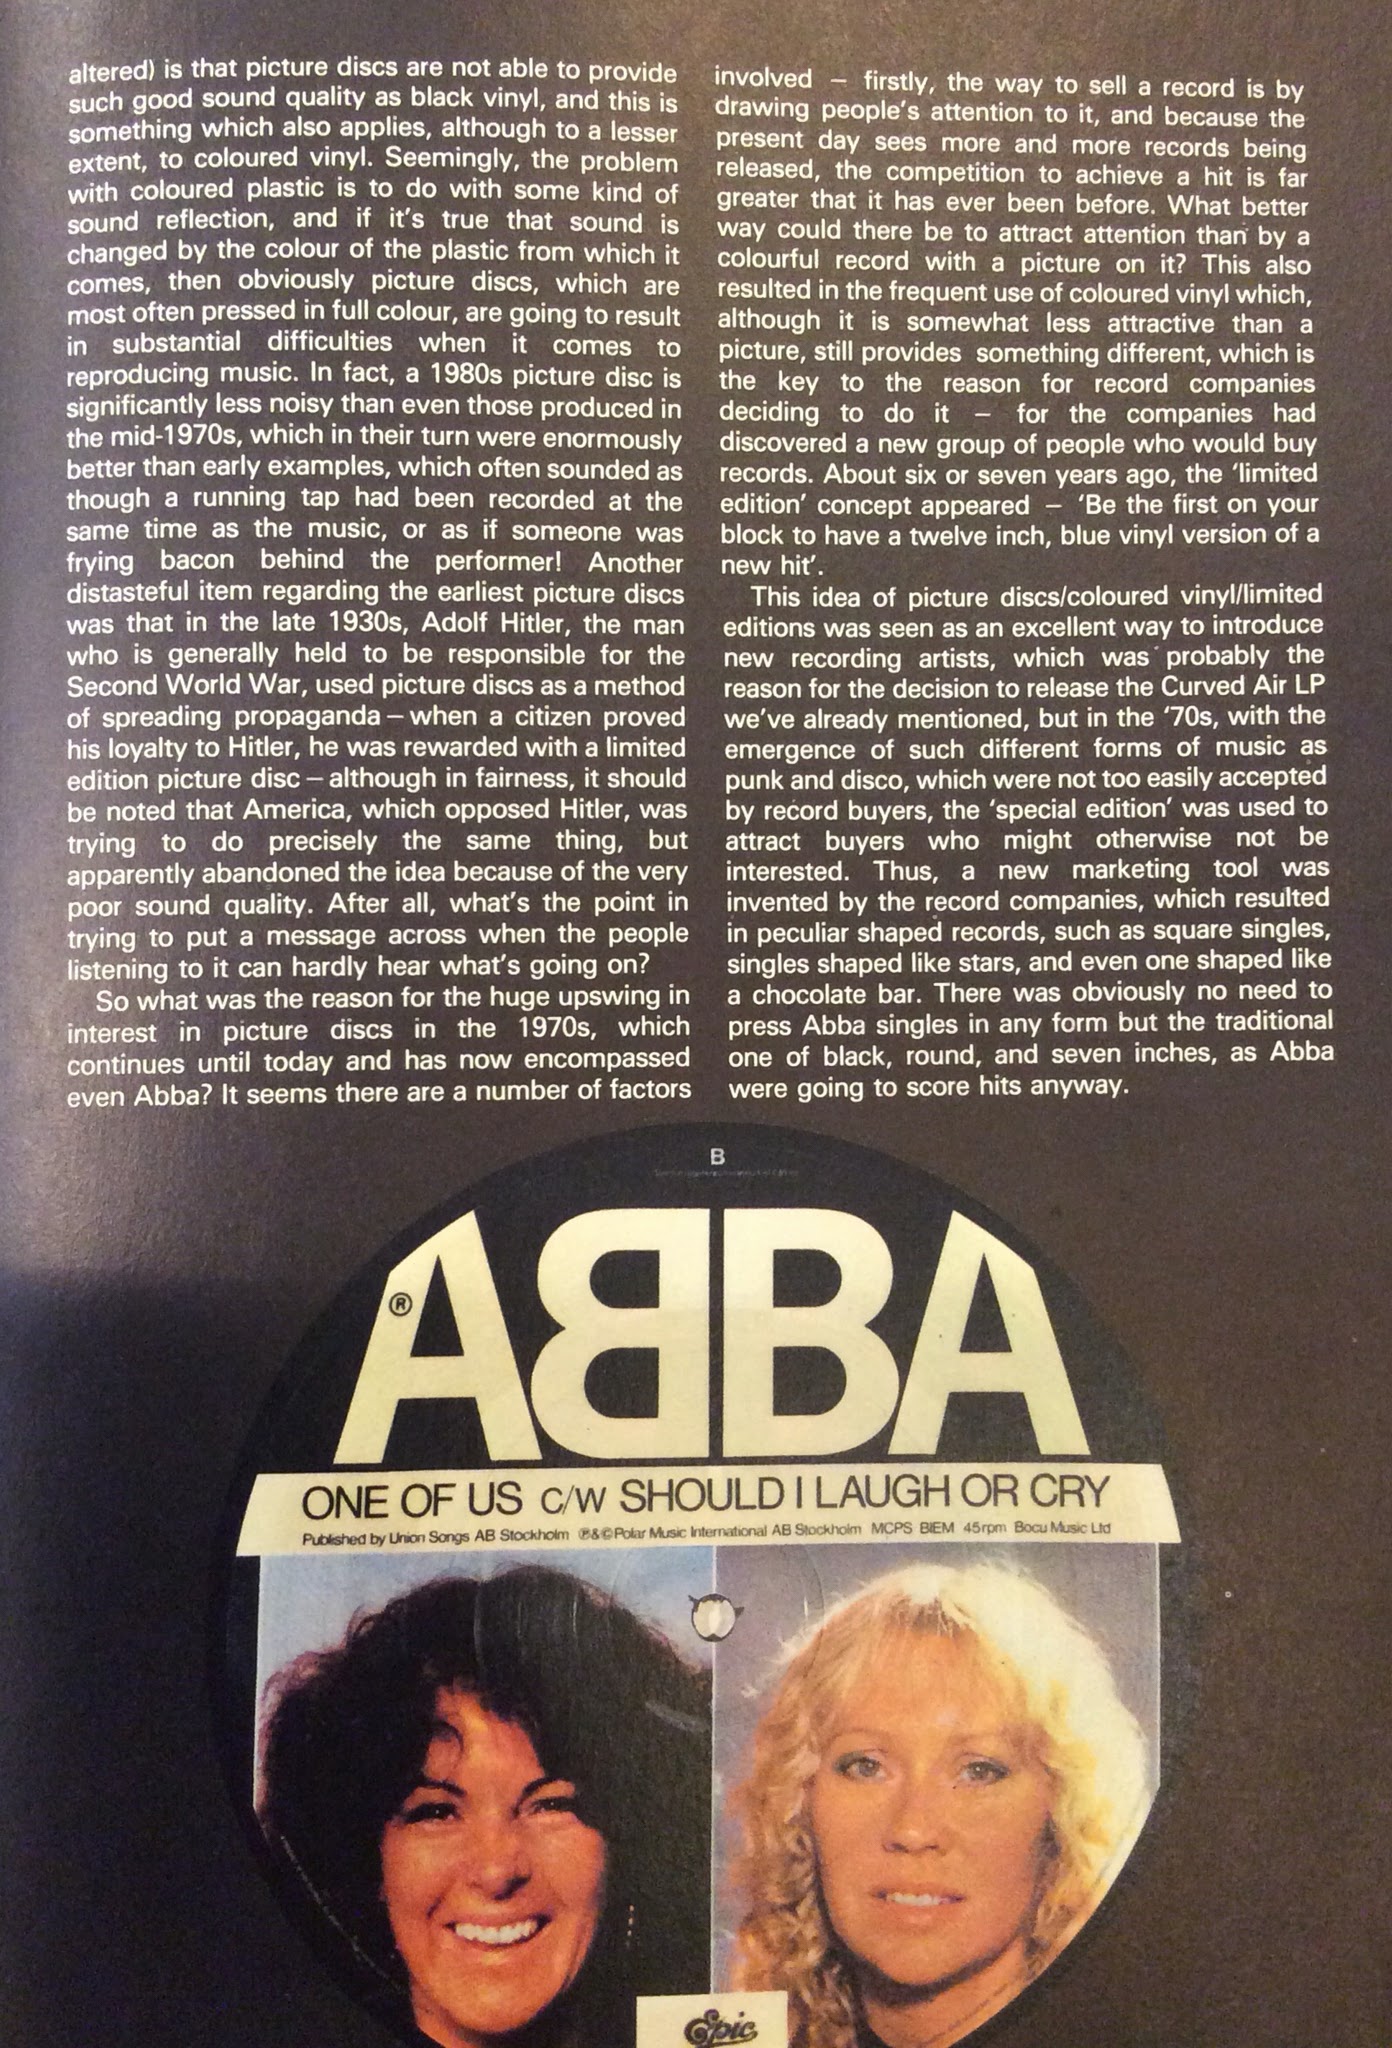 ABBA Fans Blog: Abba Annual Article On Picture Discs